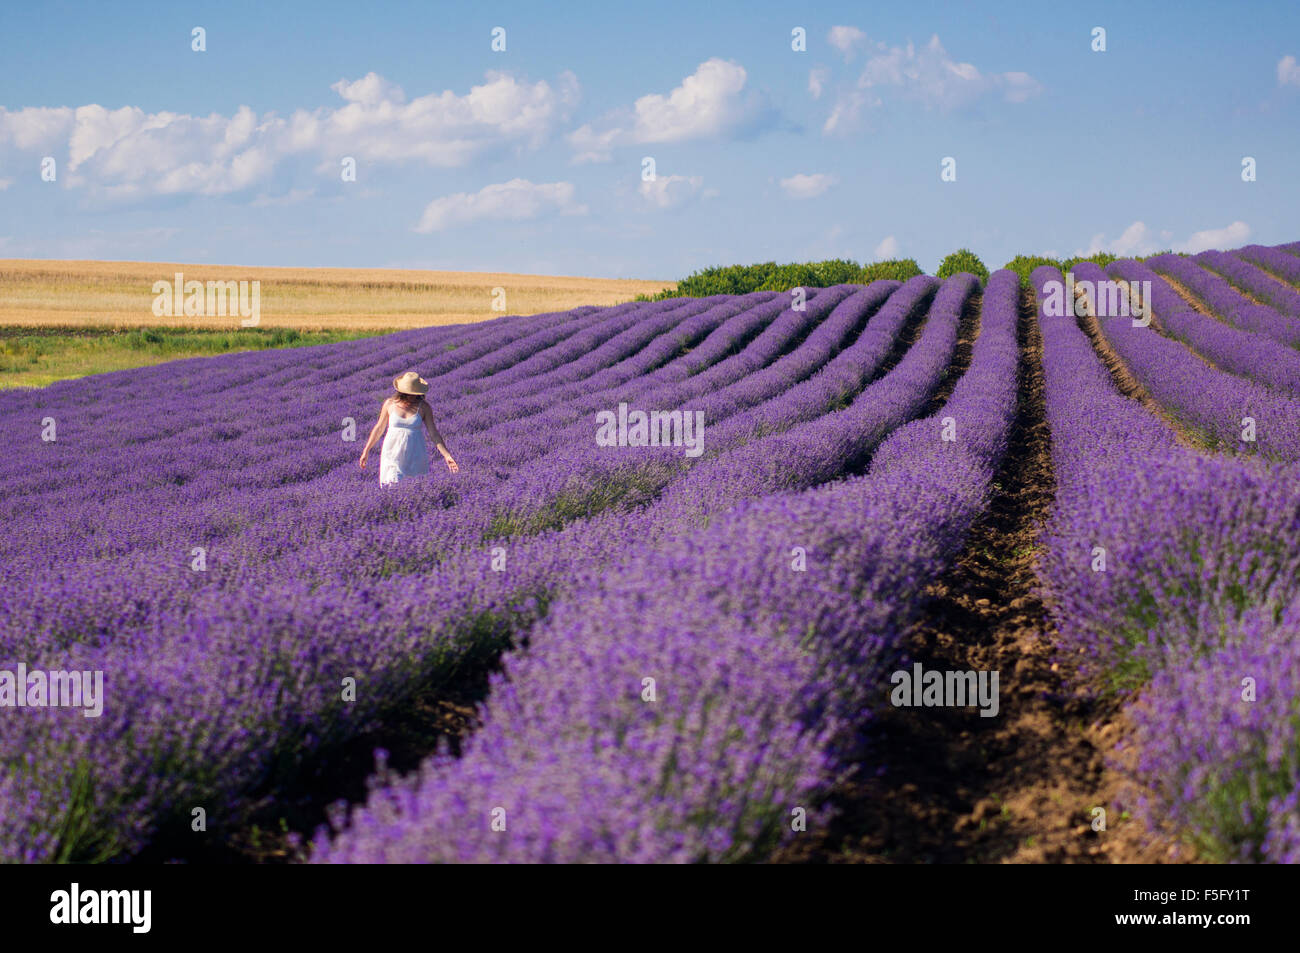 Young woman with white dress enjoying the beauty and fragrance of a filed of lavender in bloom. Stock Photo